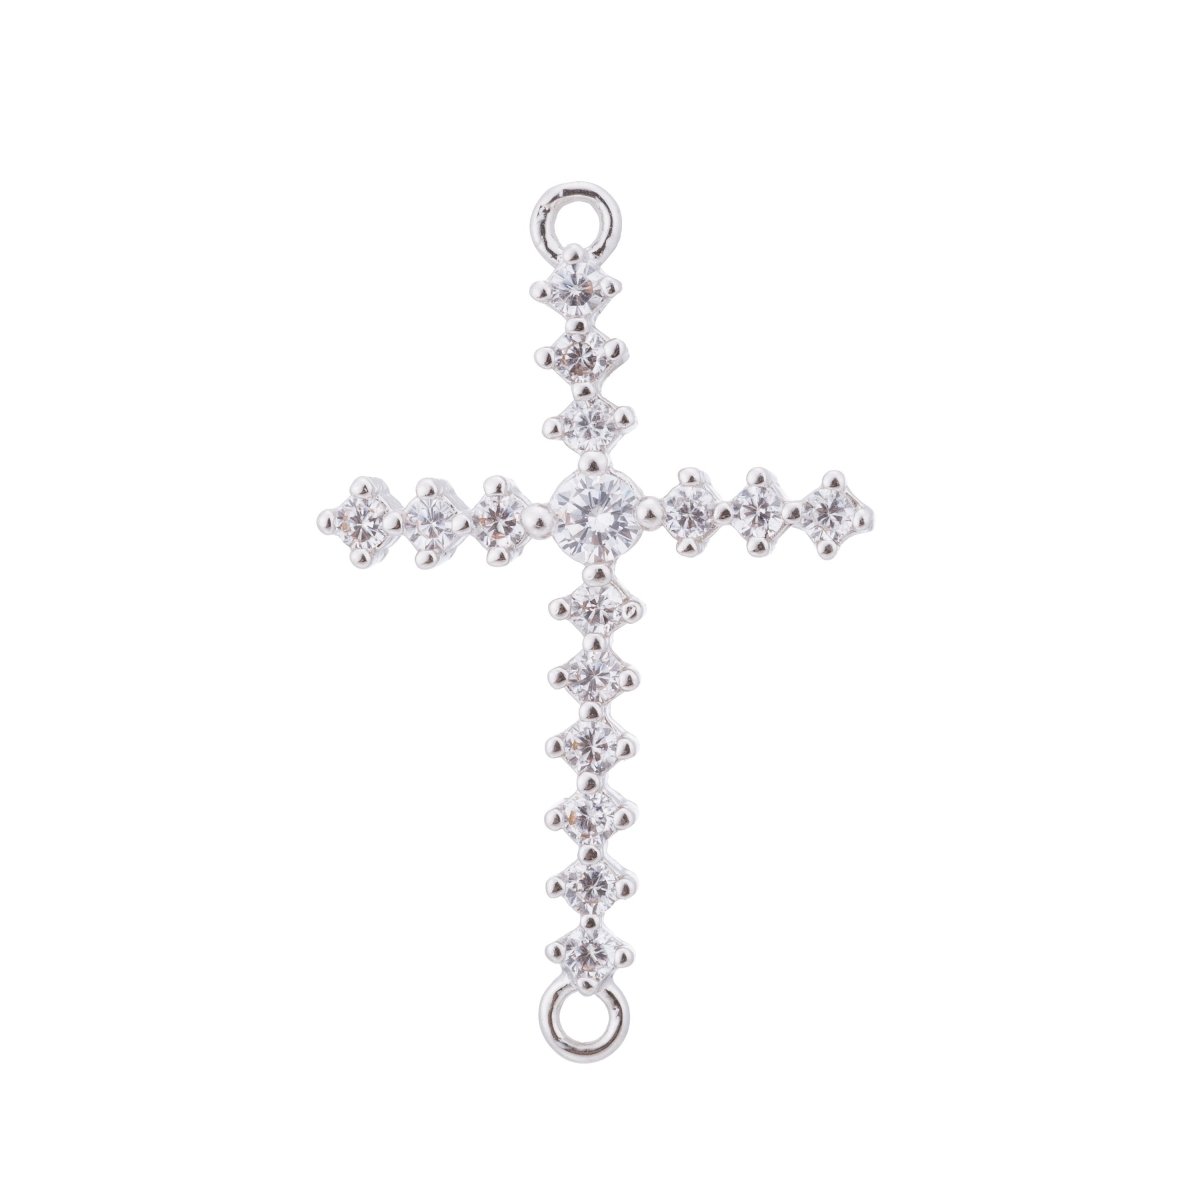 Silver Cross Charm, Christian Bracelet, Cross Connector, Peace Hope Cubic Zircon Pave Bracelet Charm Bead Connector for Jewelry Making F-106 - DLUXCA